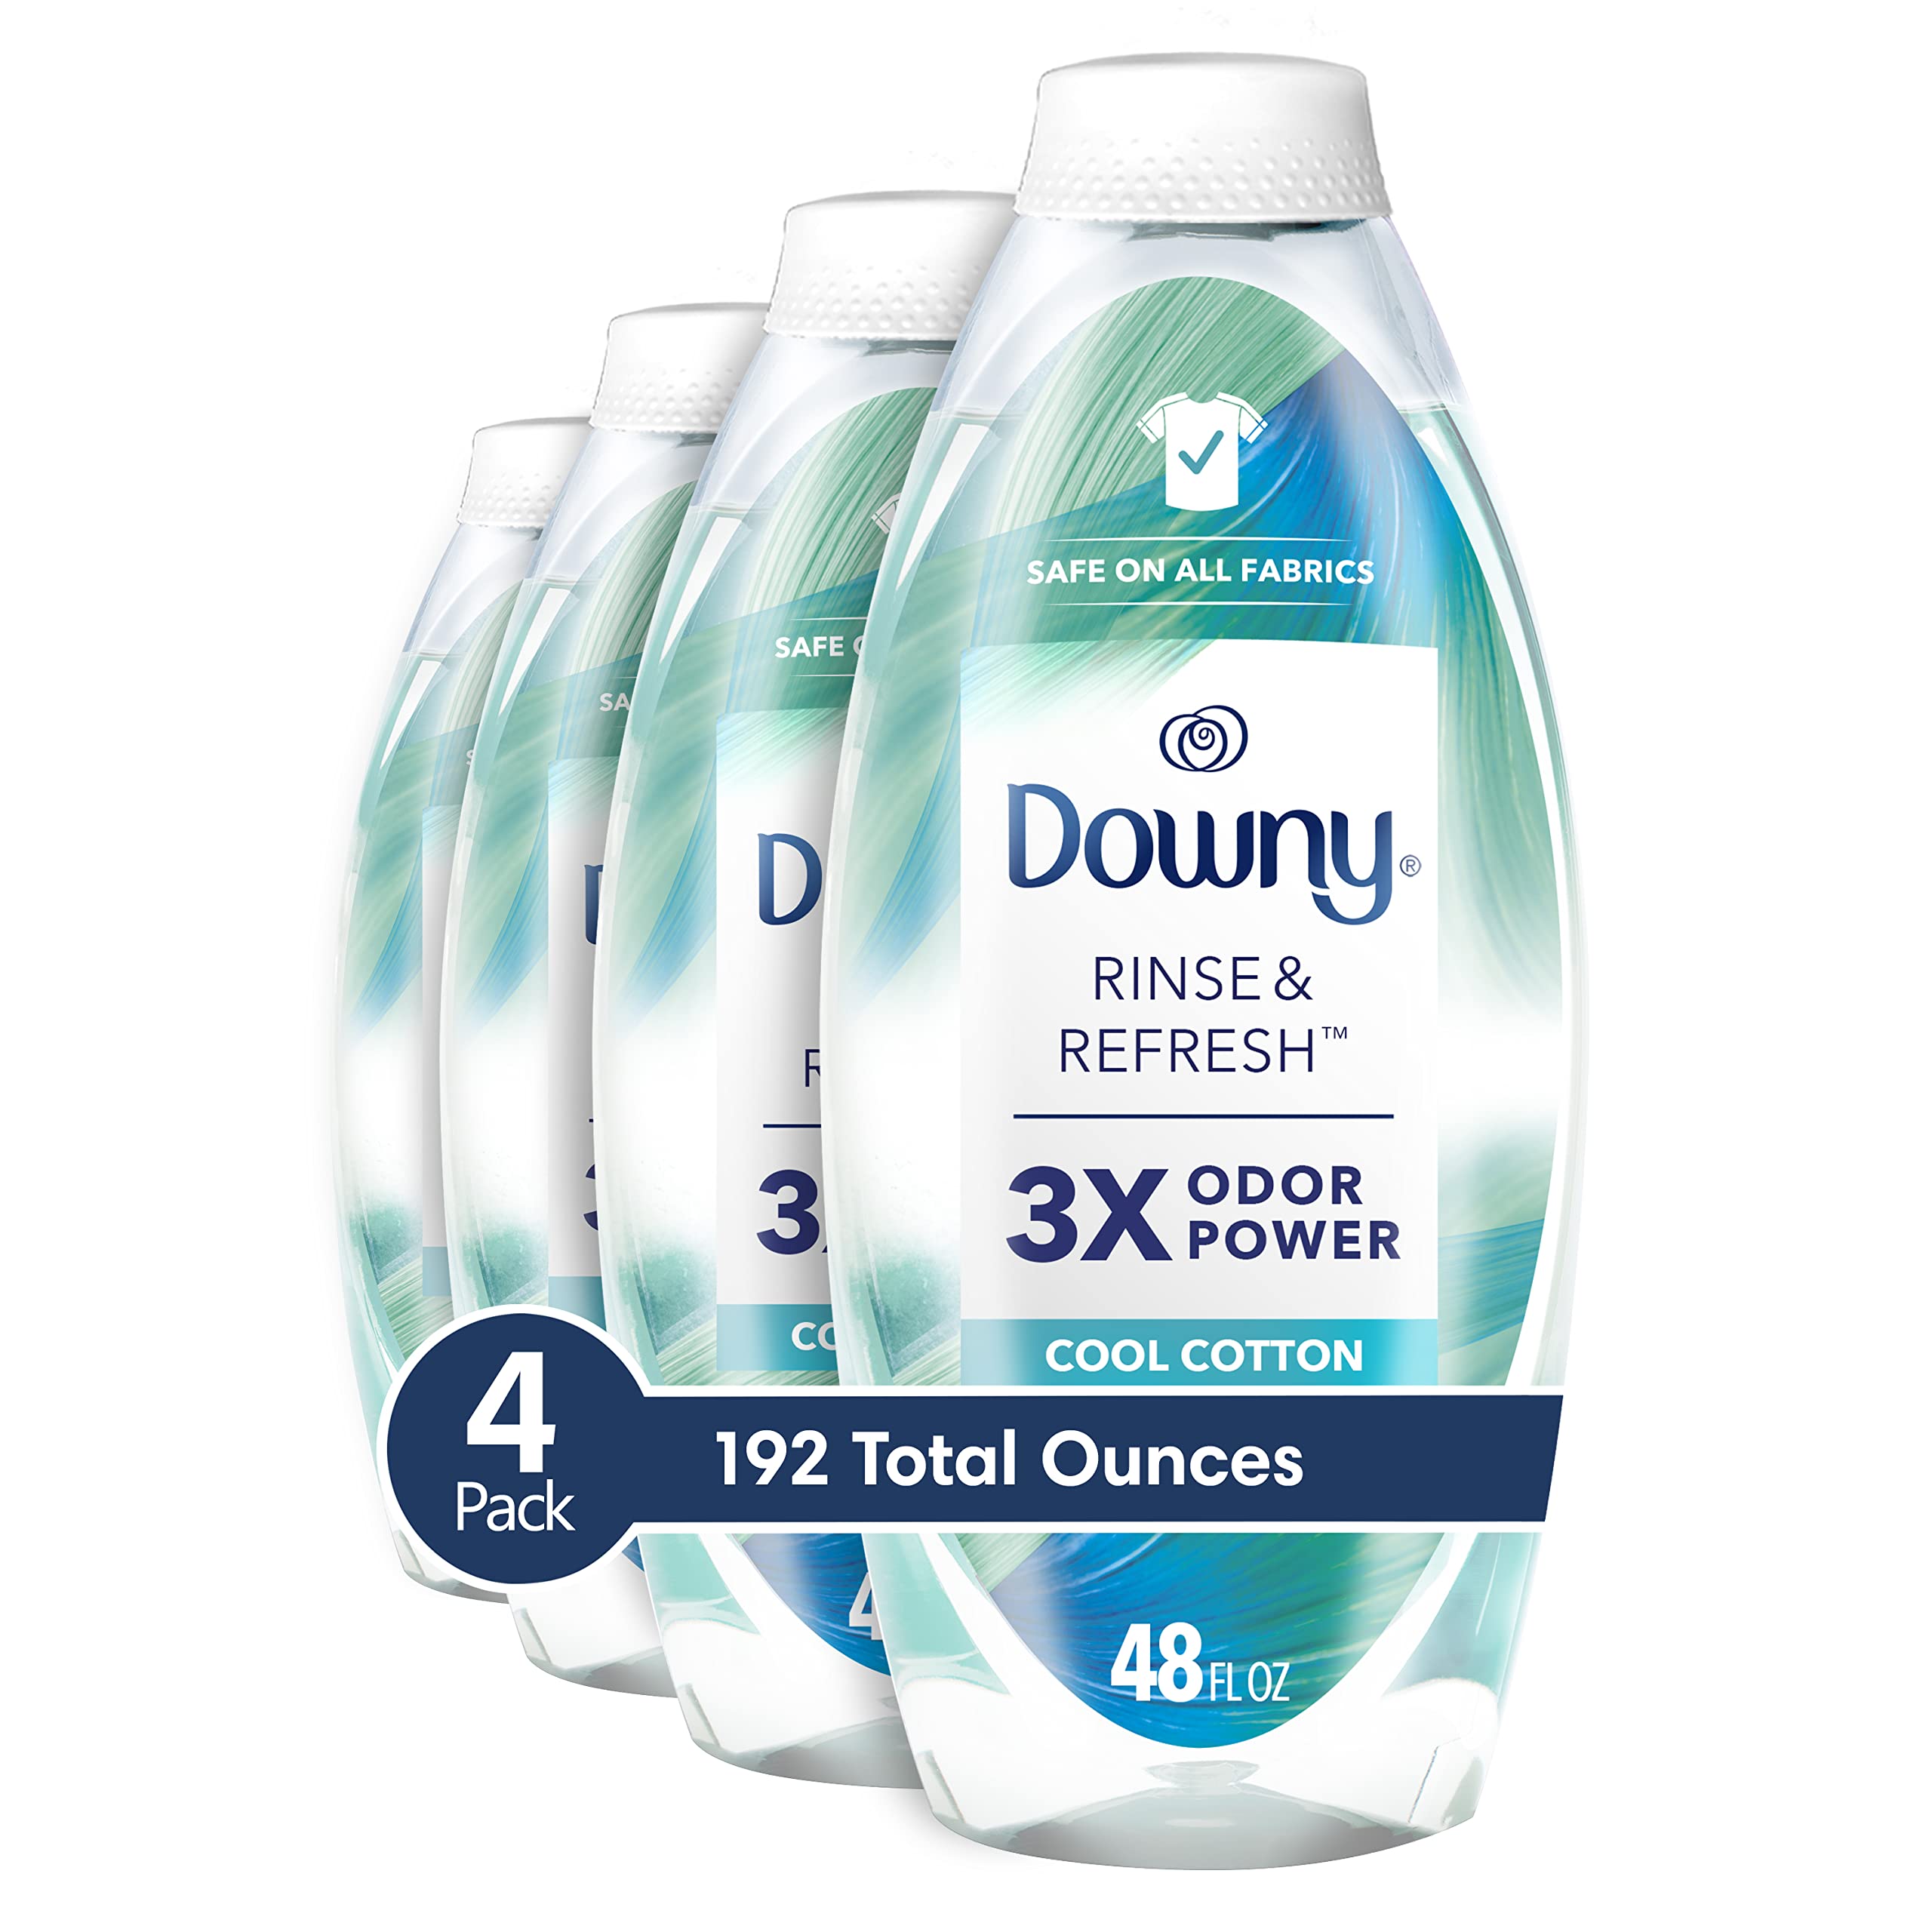 4-Pack 48-Oz Downy RINSE & REFRESH Laundry Odor Remover and Fabric Softener (Cool Cotton) $49.29 + $35 Amazon Credit w/ S&S + Free Shipping